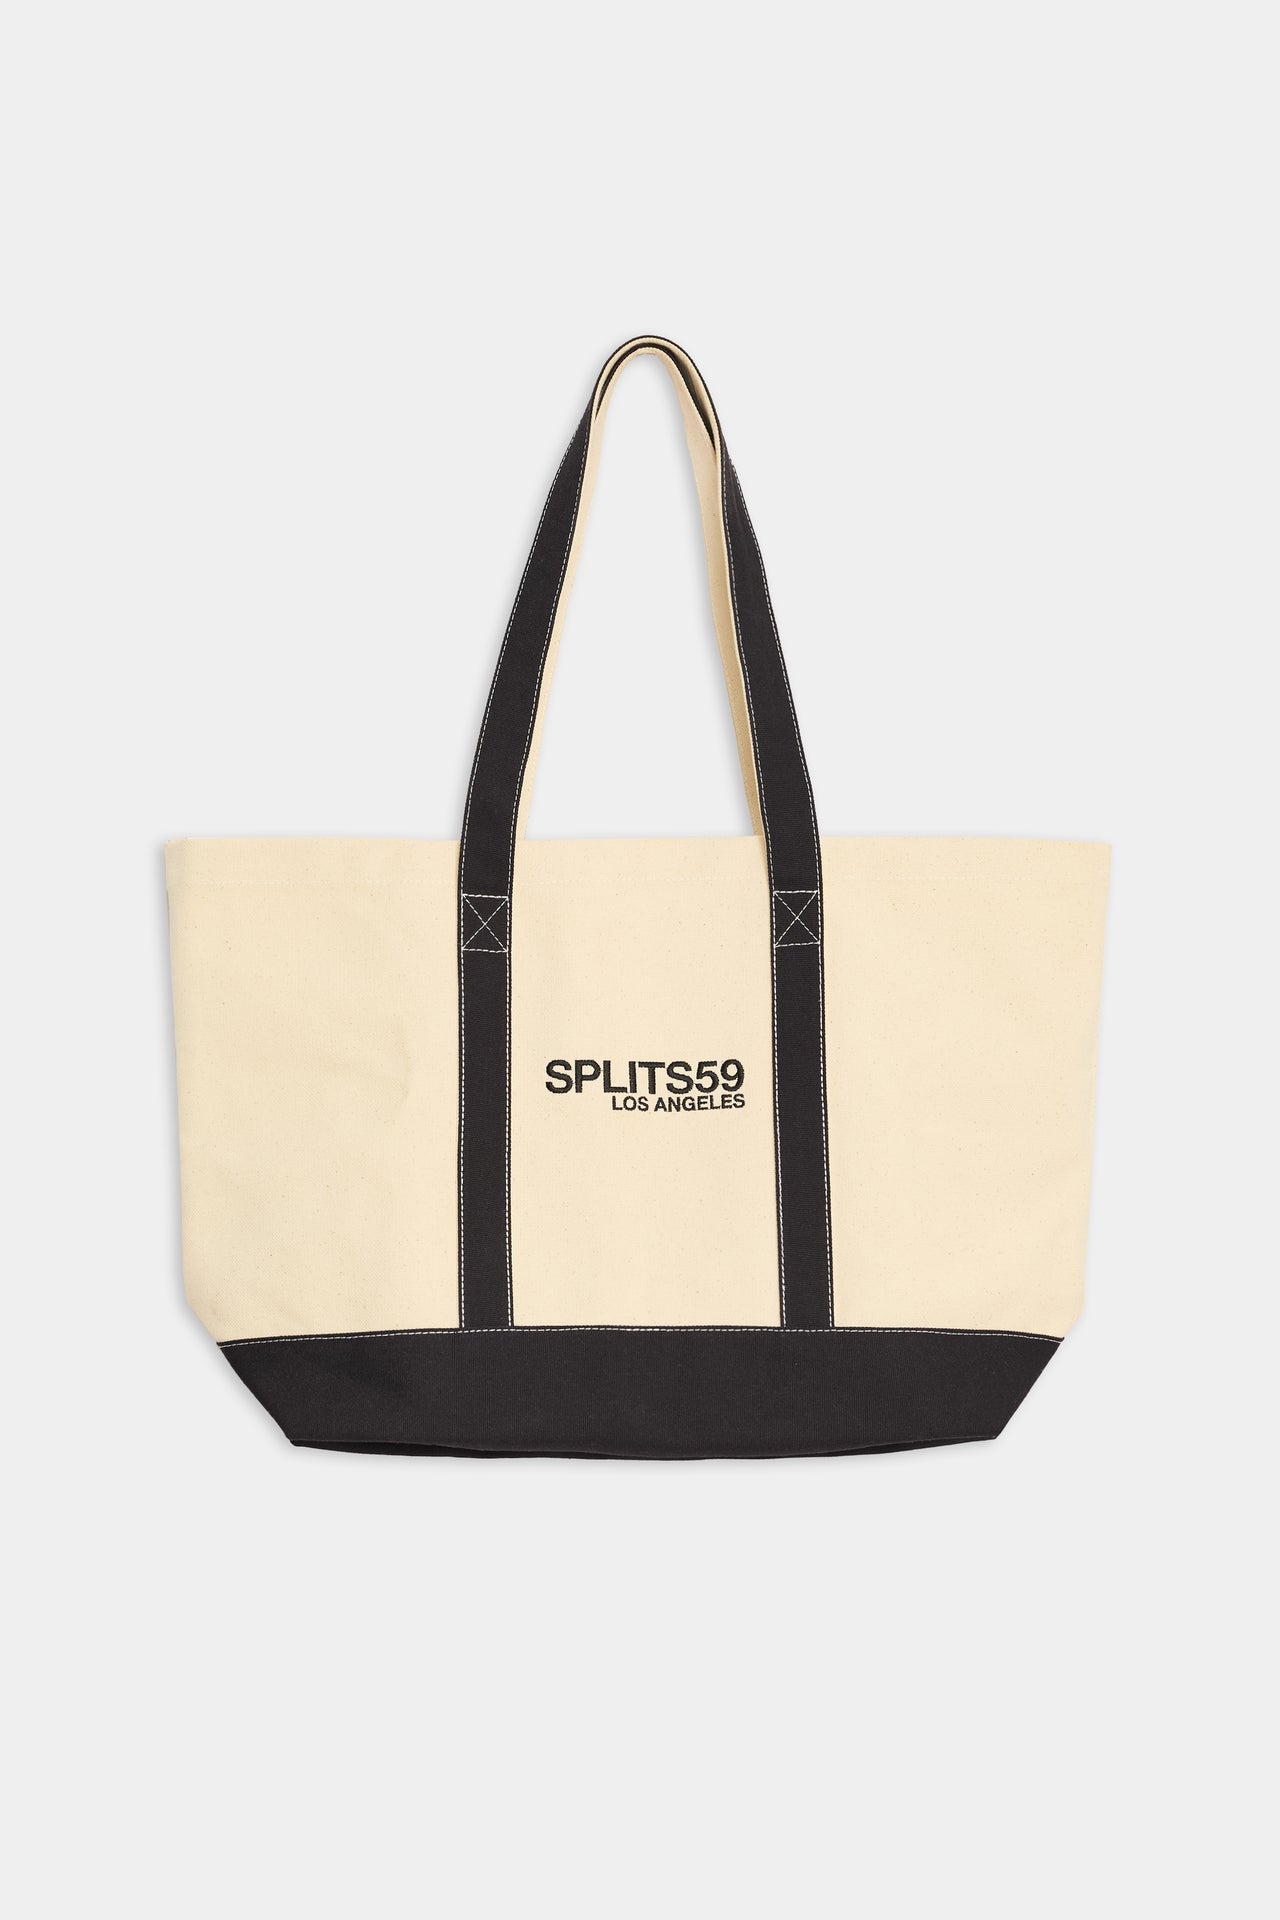 Yellowish white tote bag with black bottom and straps